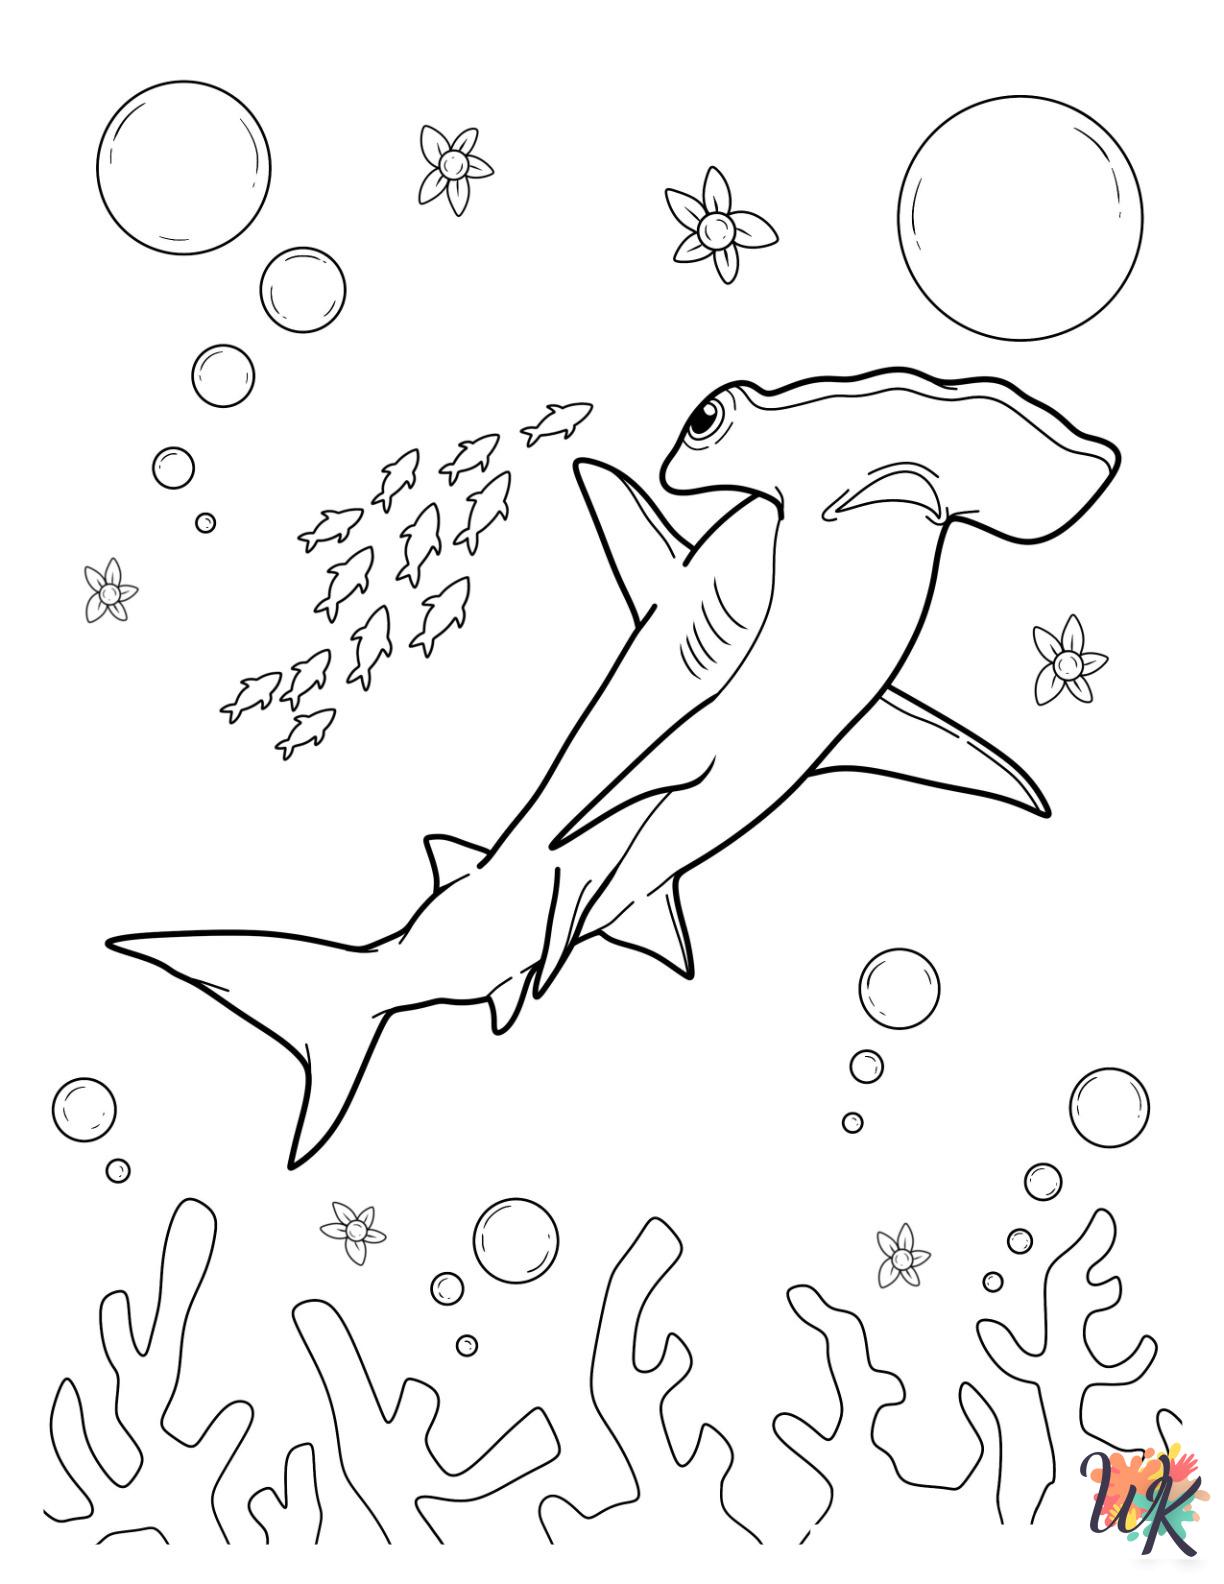 Hammerhead Shark free coloring pages